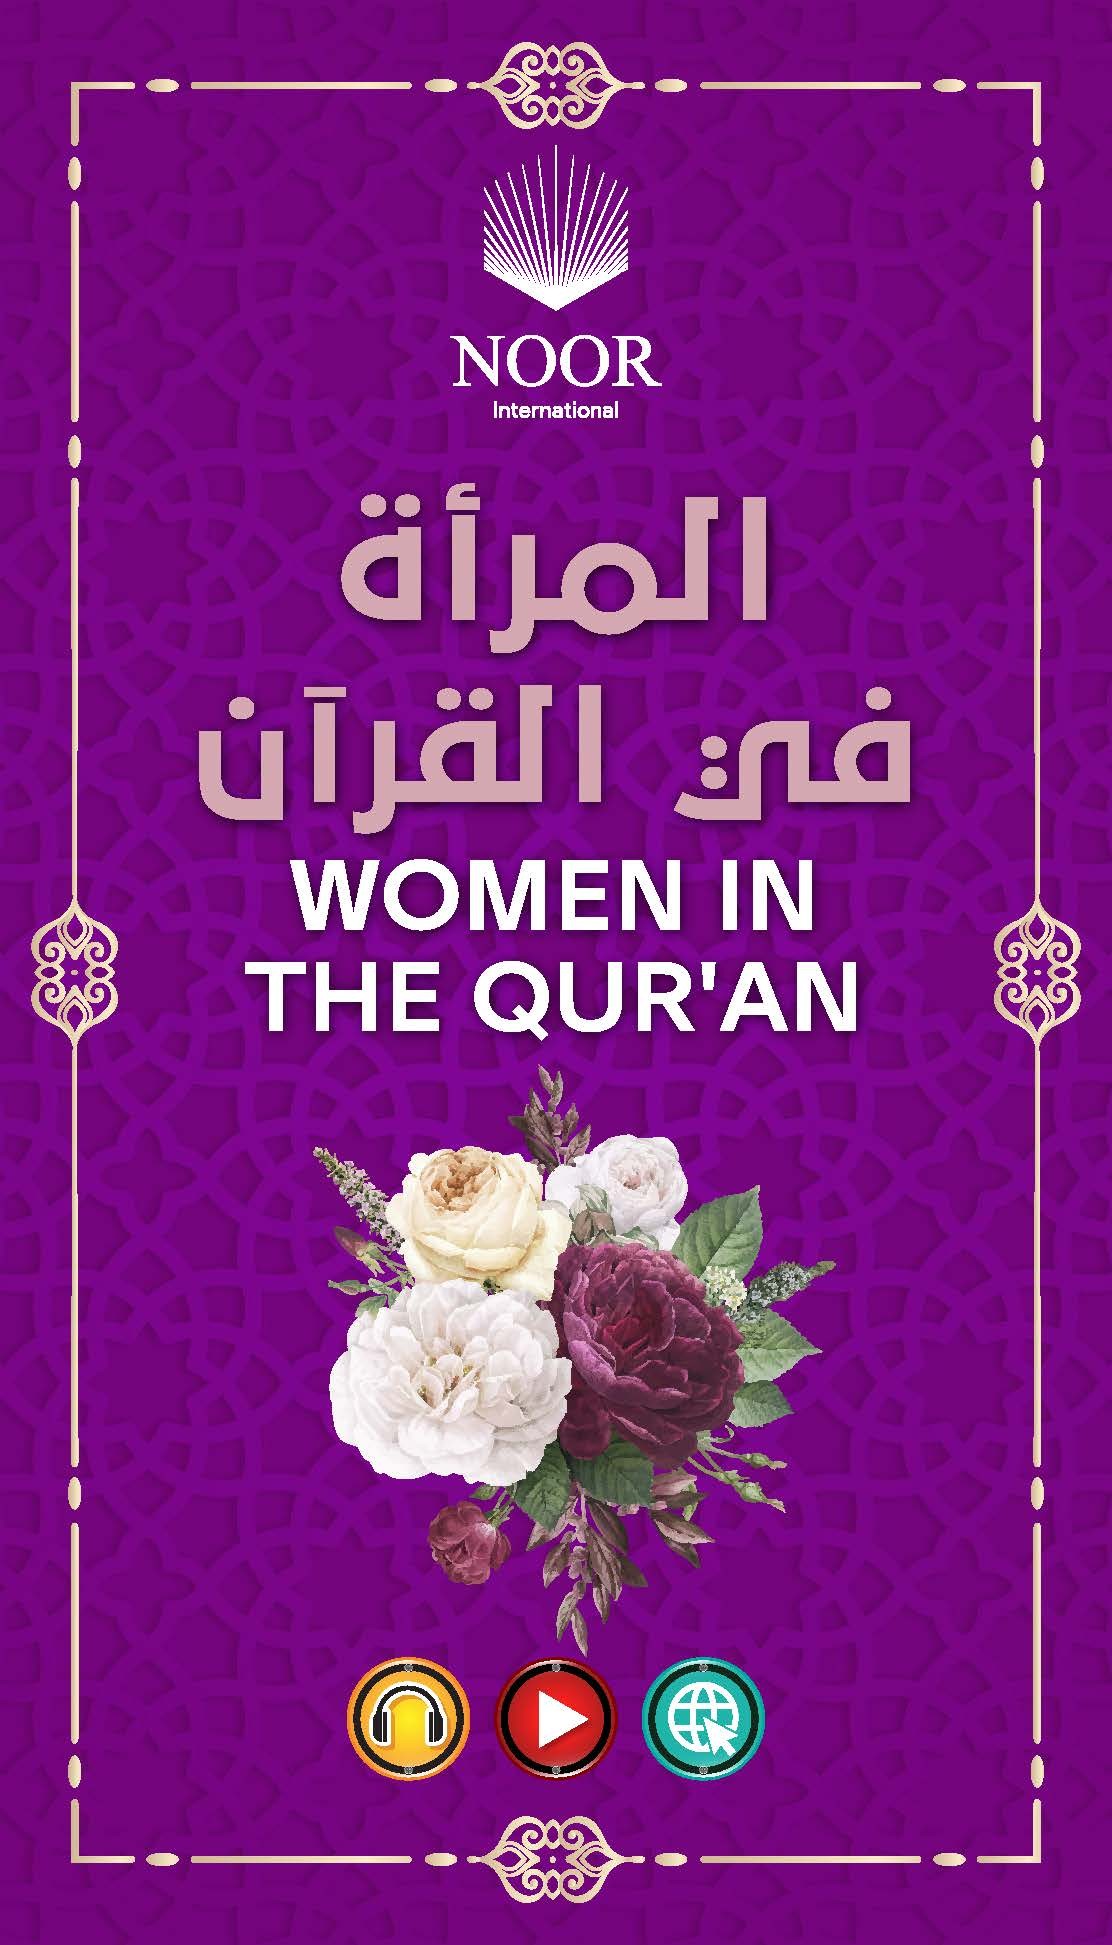 Women's rights in the Qur'an